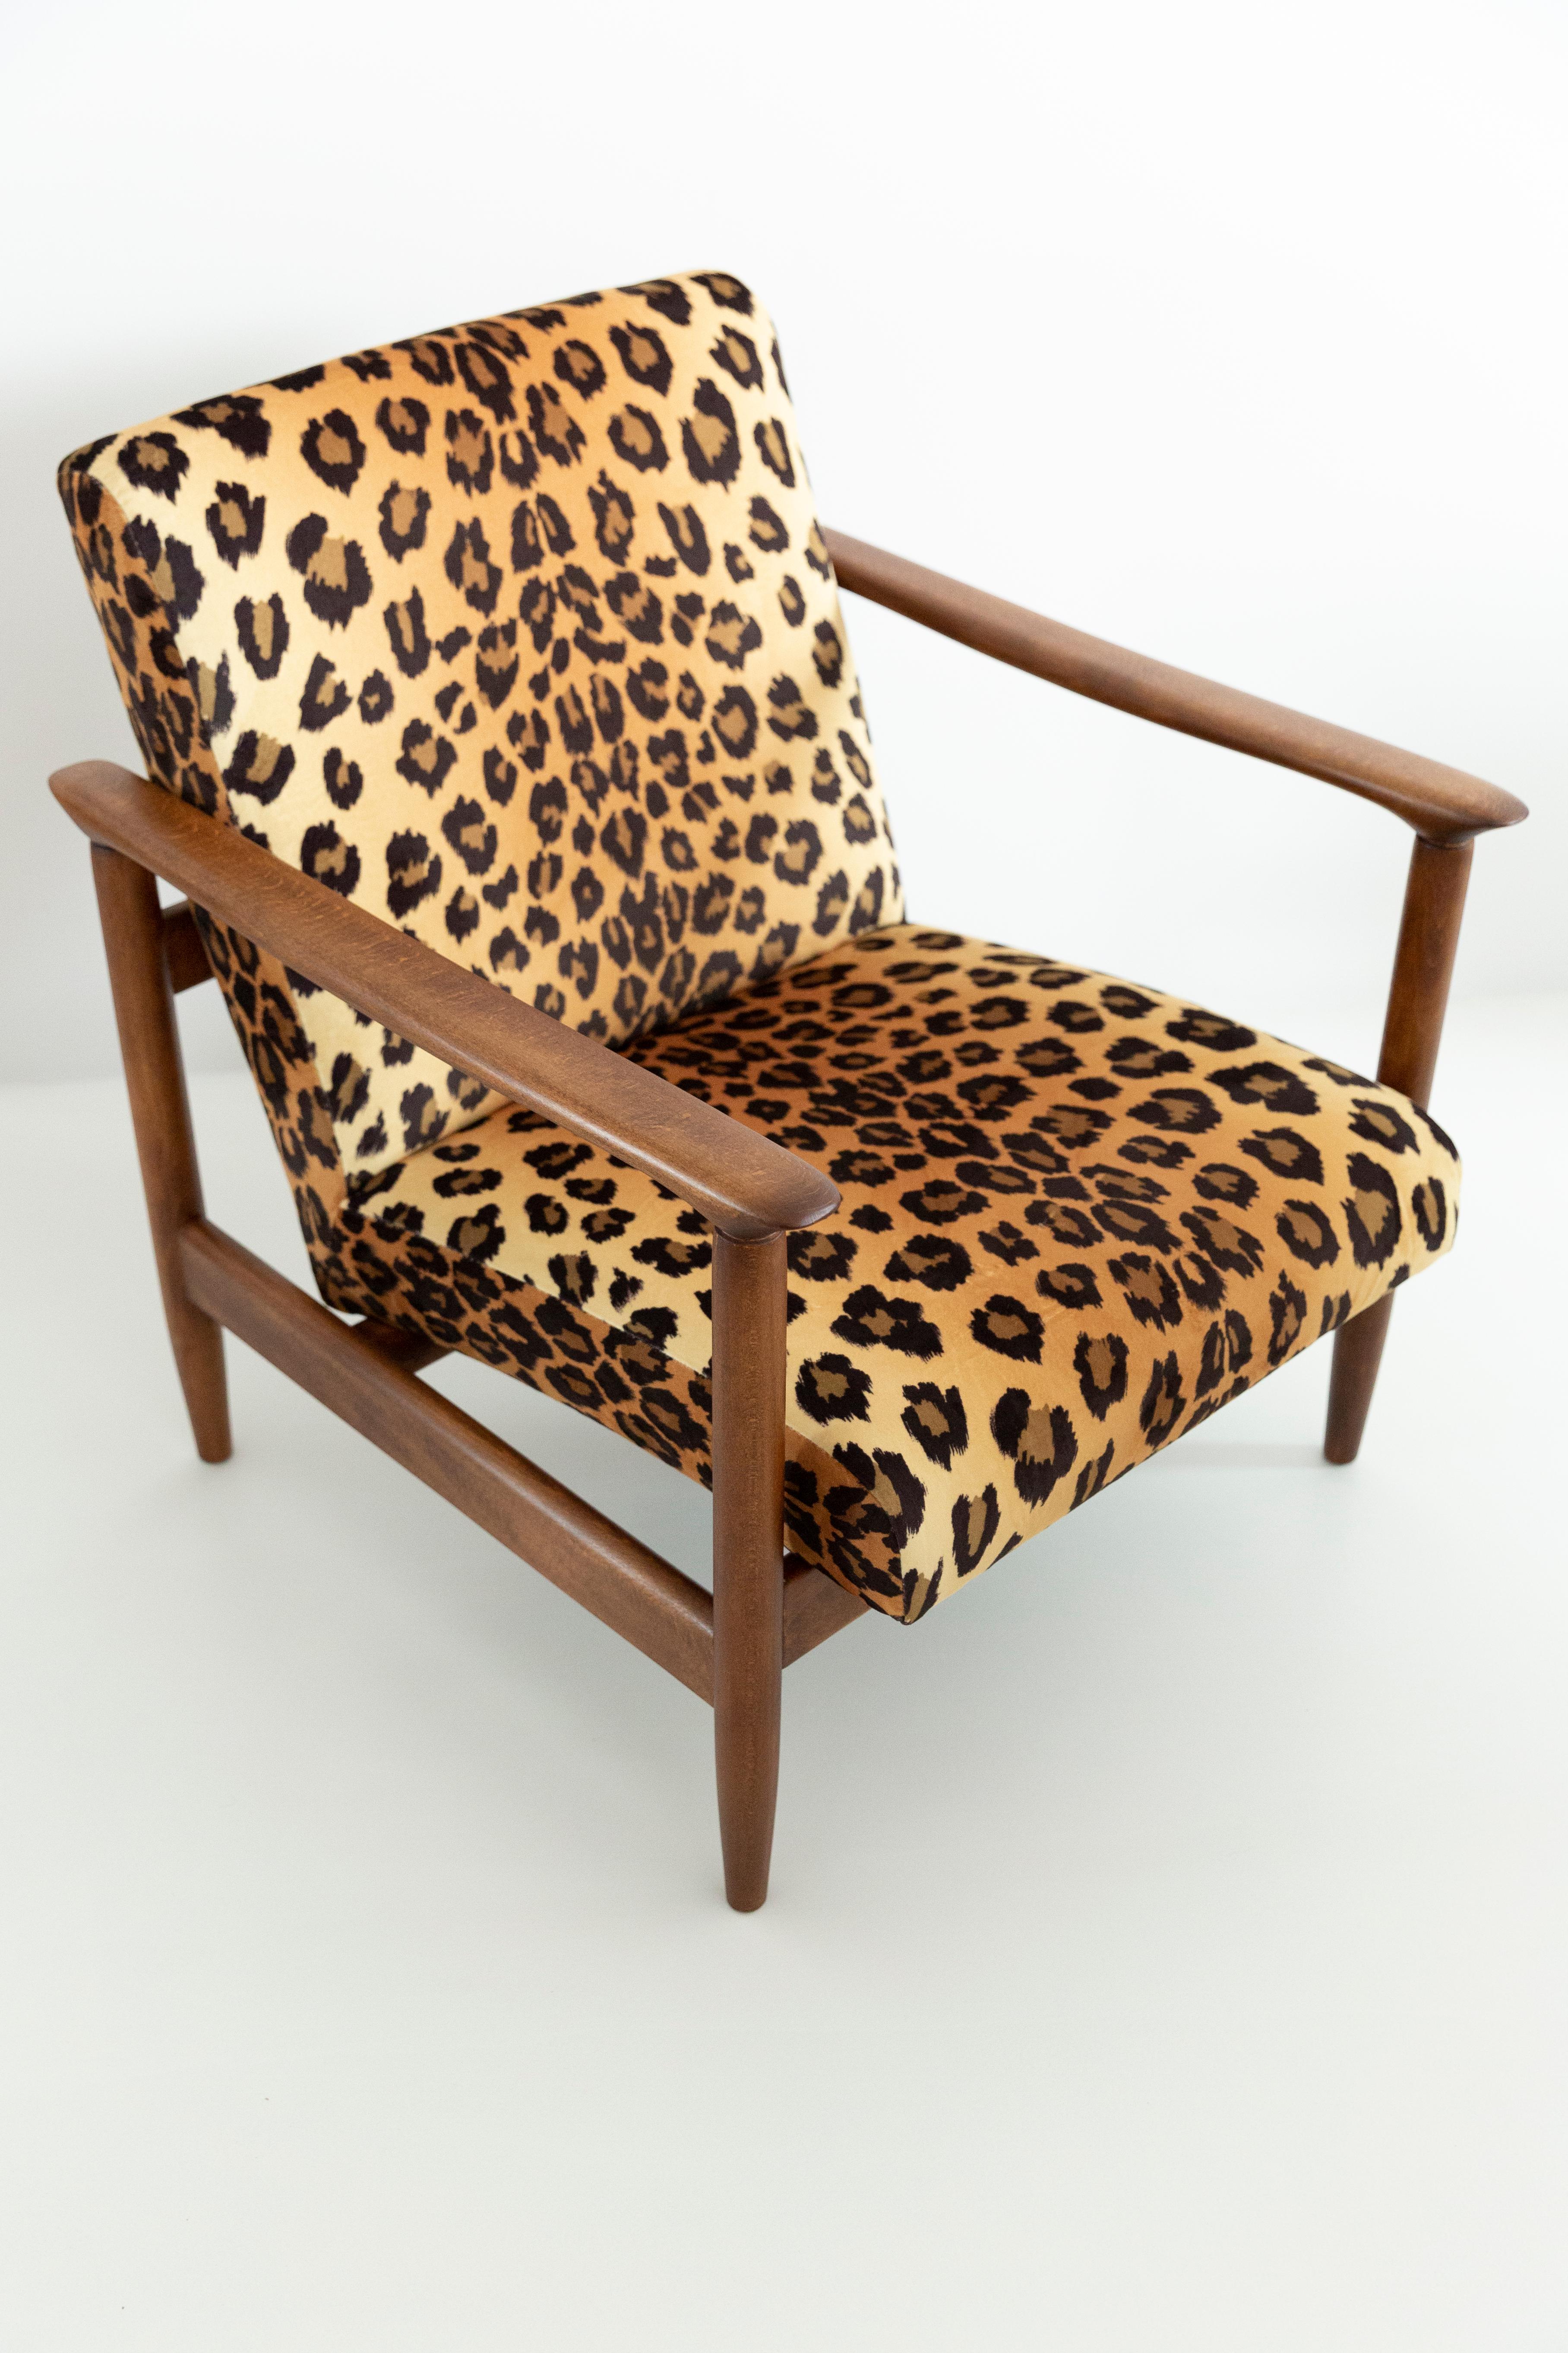 Beautiful Leopard Armchair GFM-142, designed by Edmund Homa, a polish architect, designer of Industrial Design and interior architecture, professor at the Academy of Fine Arts in Gdansk.

The armchair was made in the 1960s in the Gosciecinska